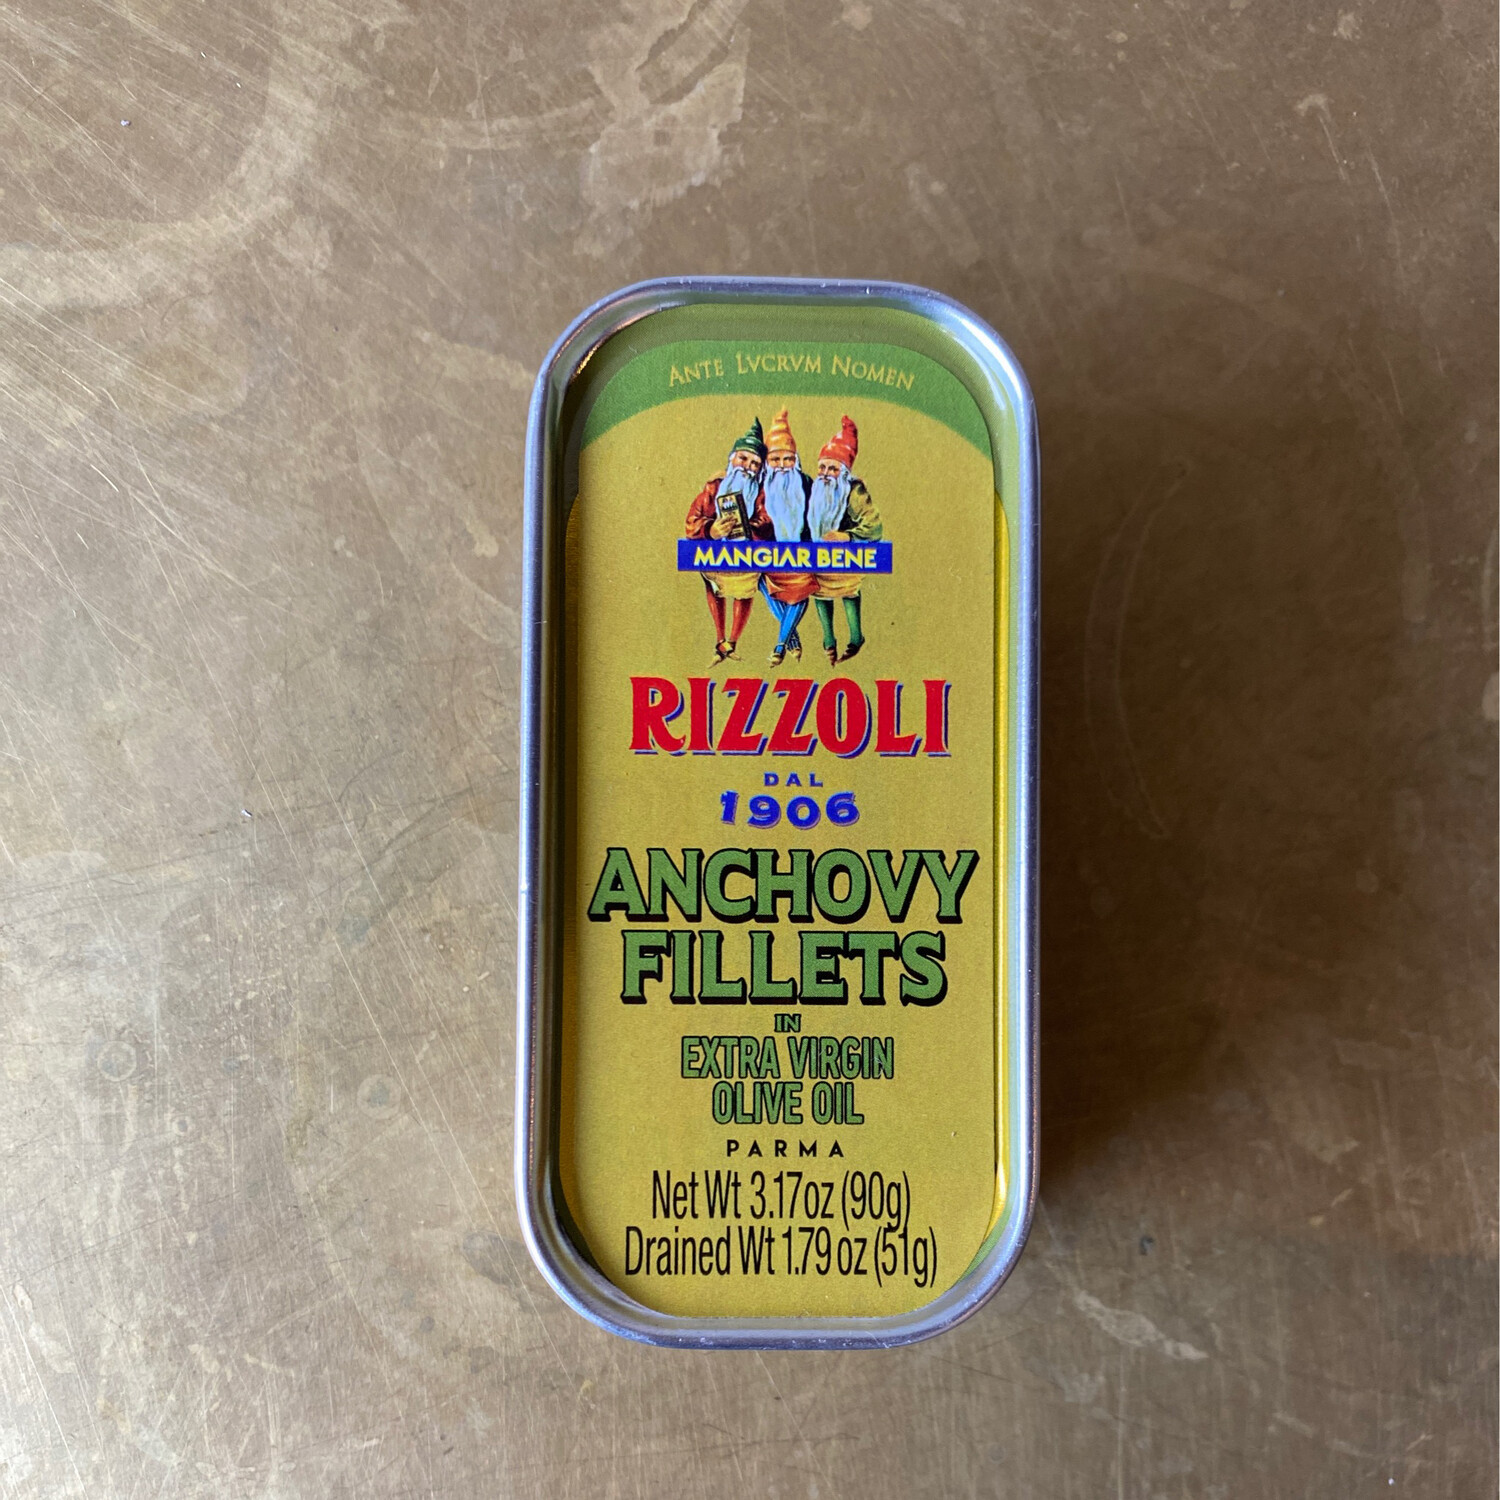 Rizzoli Anchovy Fillets